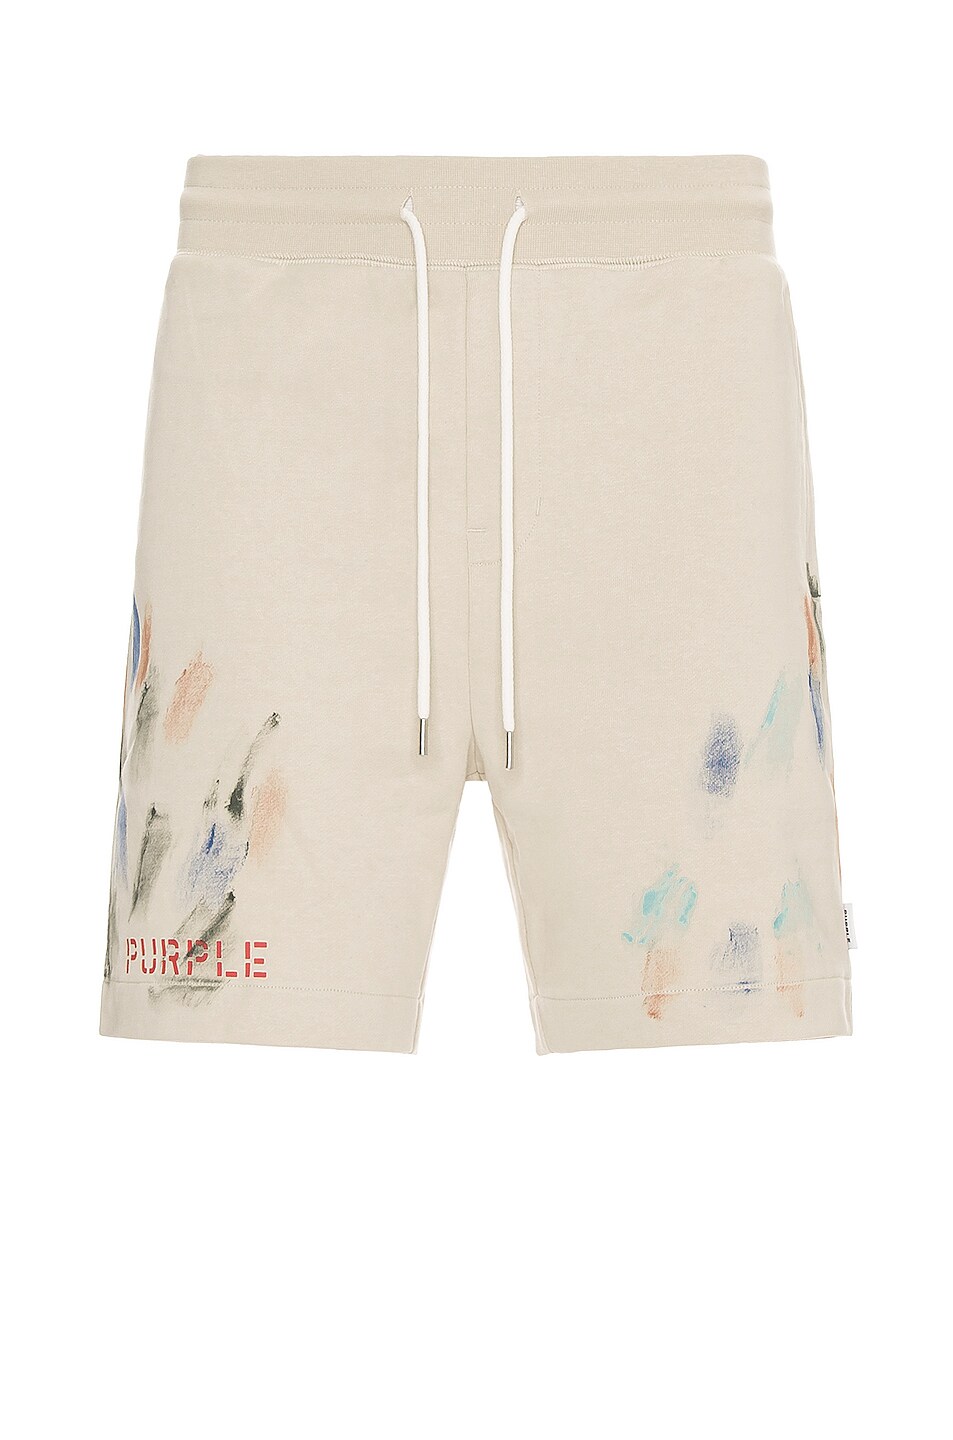 Image 1 of Purple Brand French Terry Paint Shorts in Cream